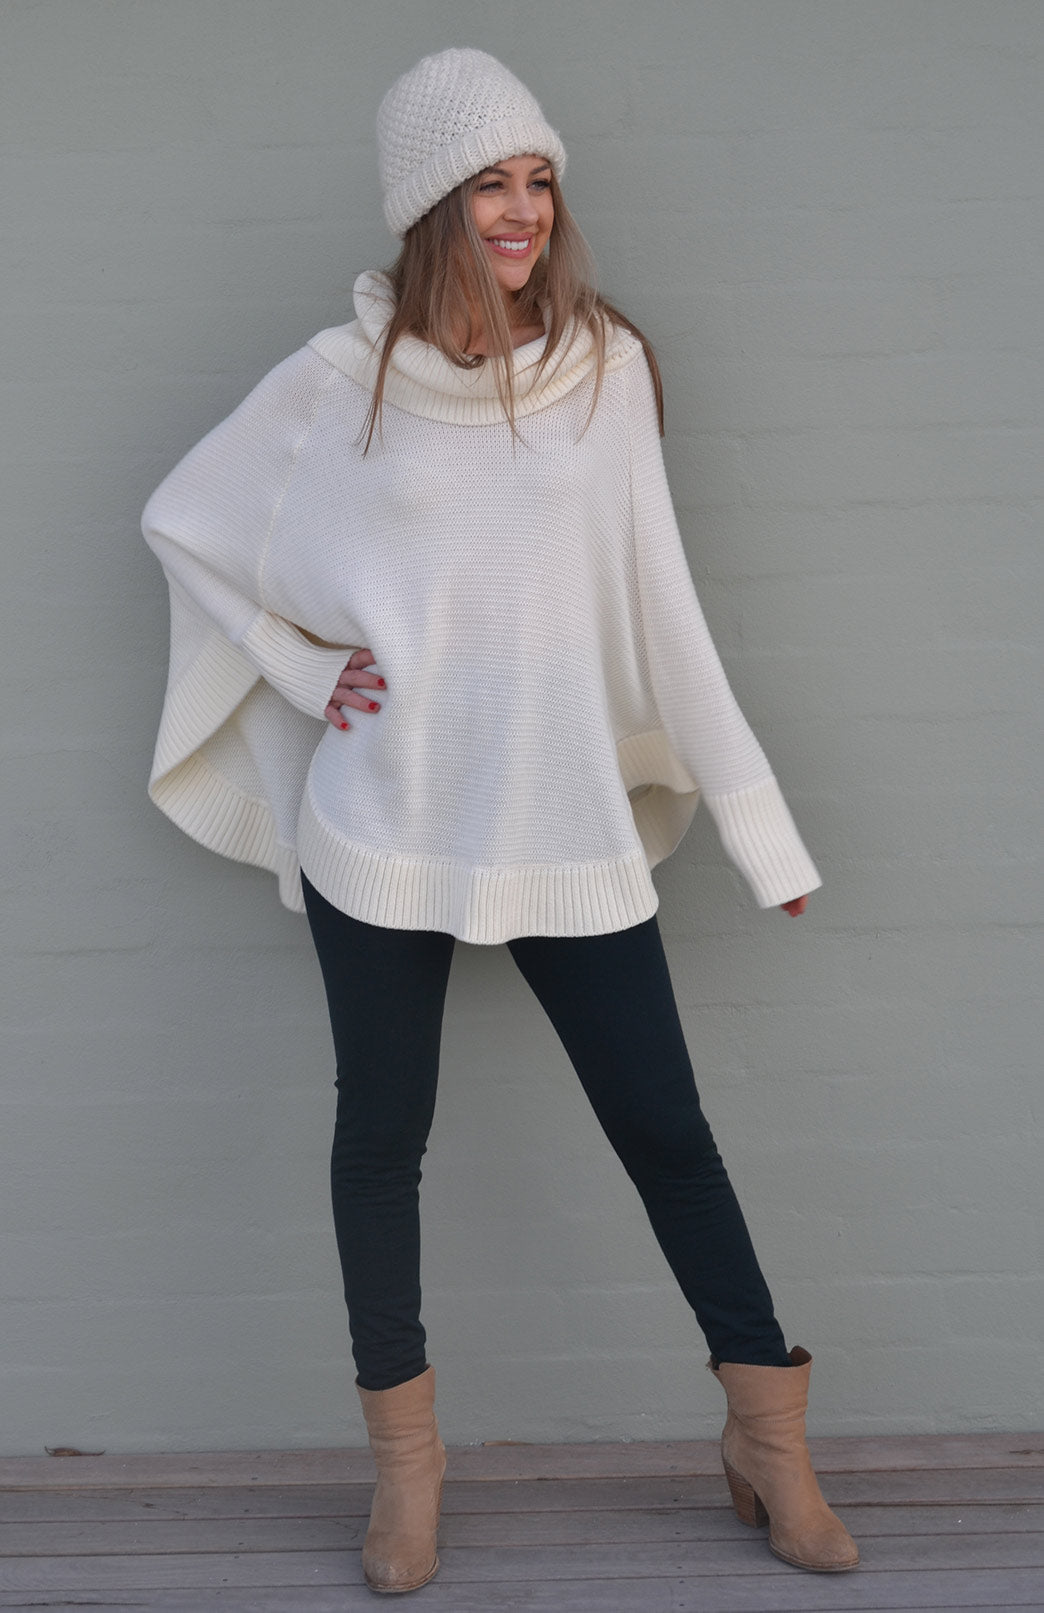 Women's White Cable Sweater, Grey Wool Leggings, White High Top